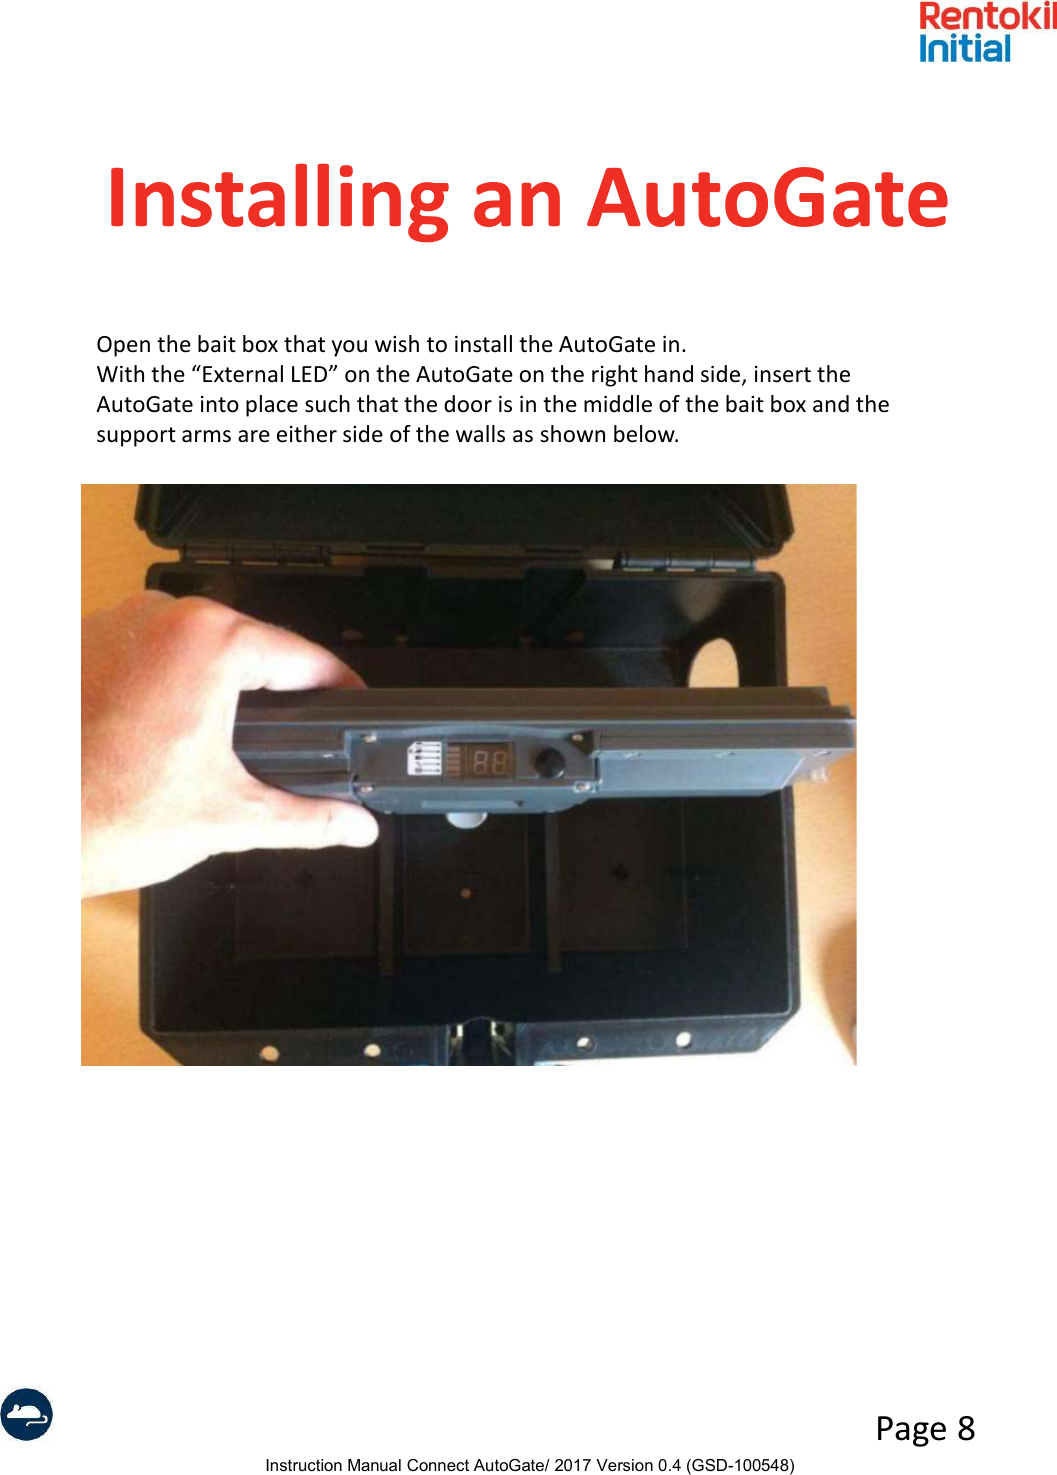 Instruction Manual Connect AutoGate/ 2017 Version 0.4 (GSD-100548)Page 8Installing an AutoGateOpen the bait box that you wish to install the AutoGate in.With the “External LED” on the AutoGate on the right hand side, insert the AutoGate into place such that the door is in the middle of the bait box and the support arms are either side of the walls as shown below.